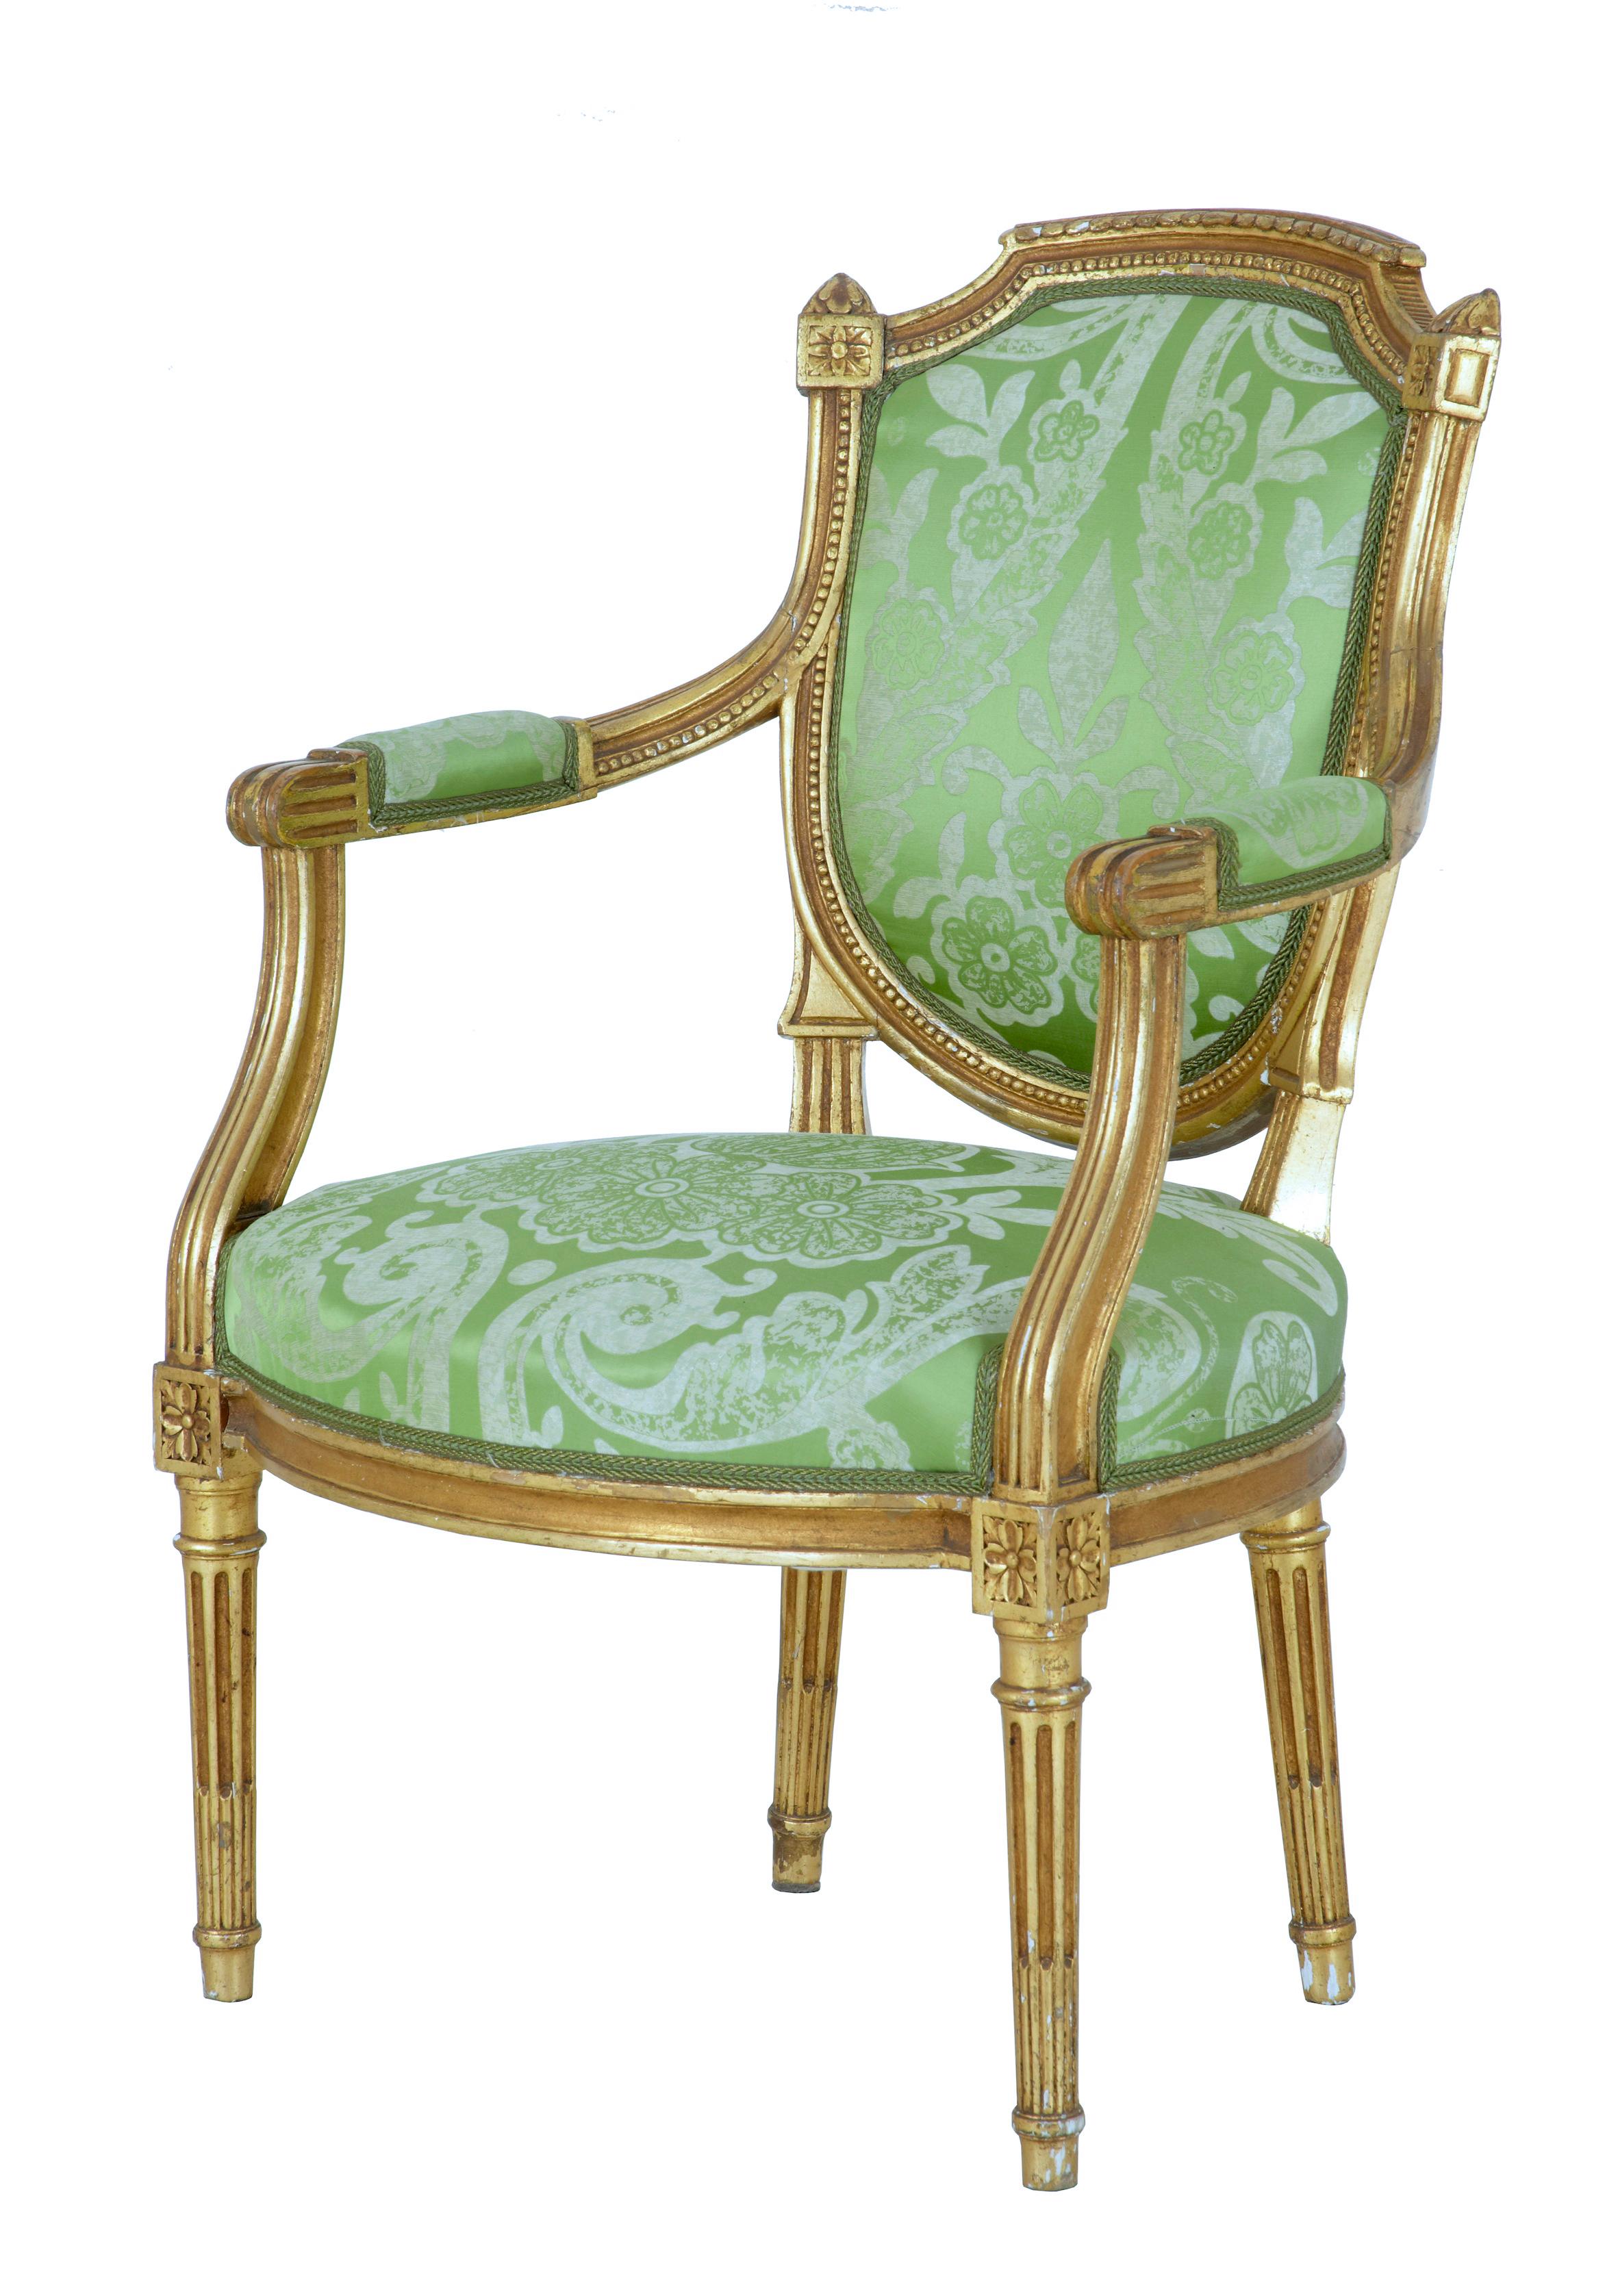 Fine set of French gilt armchairs circa 1880.

Rare to find that these chairs haven't been split up.  Shaped shield back rests with channelled and beaded detailing.  Scrolled arms with arm rest pads which link down to the over stuffed seats.  Each